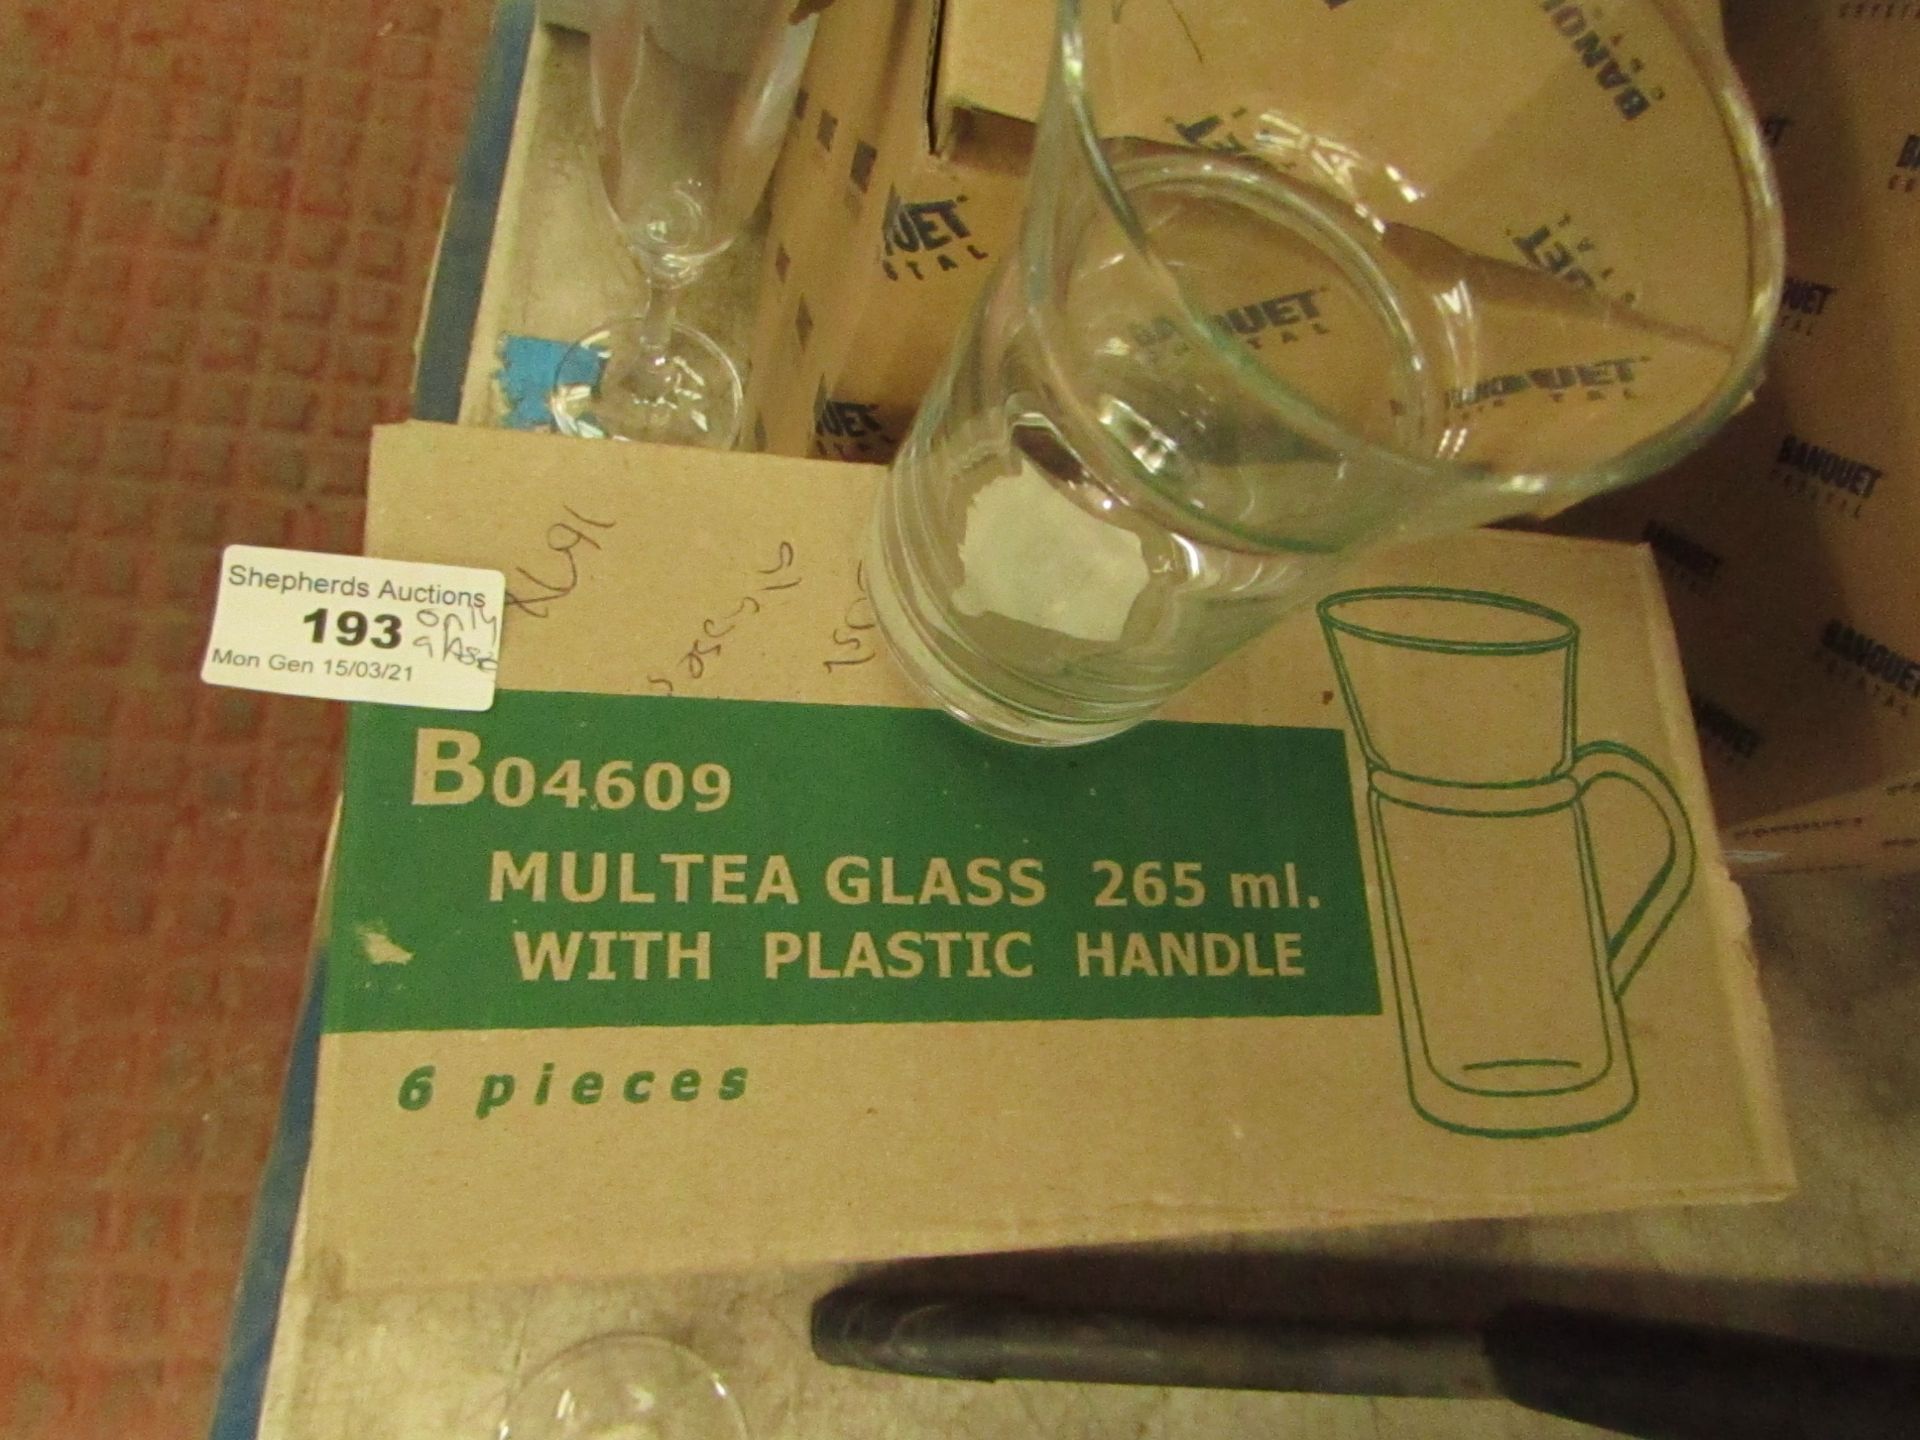 Ocean - Multea Glasses 265ml (No Plastic Handles Included) - Unchecked & Boxed.